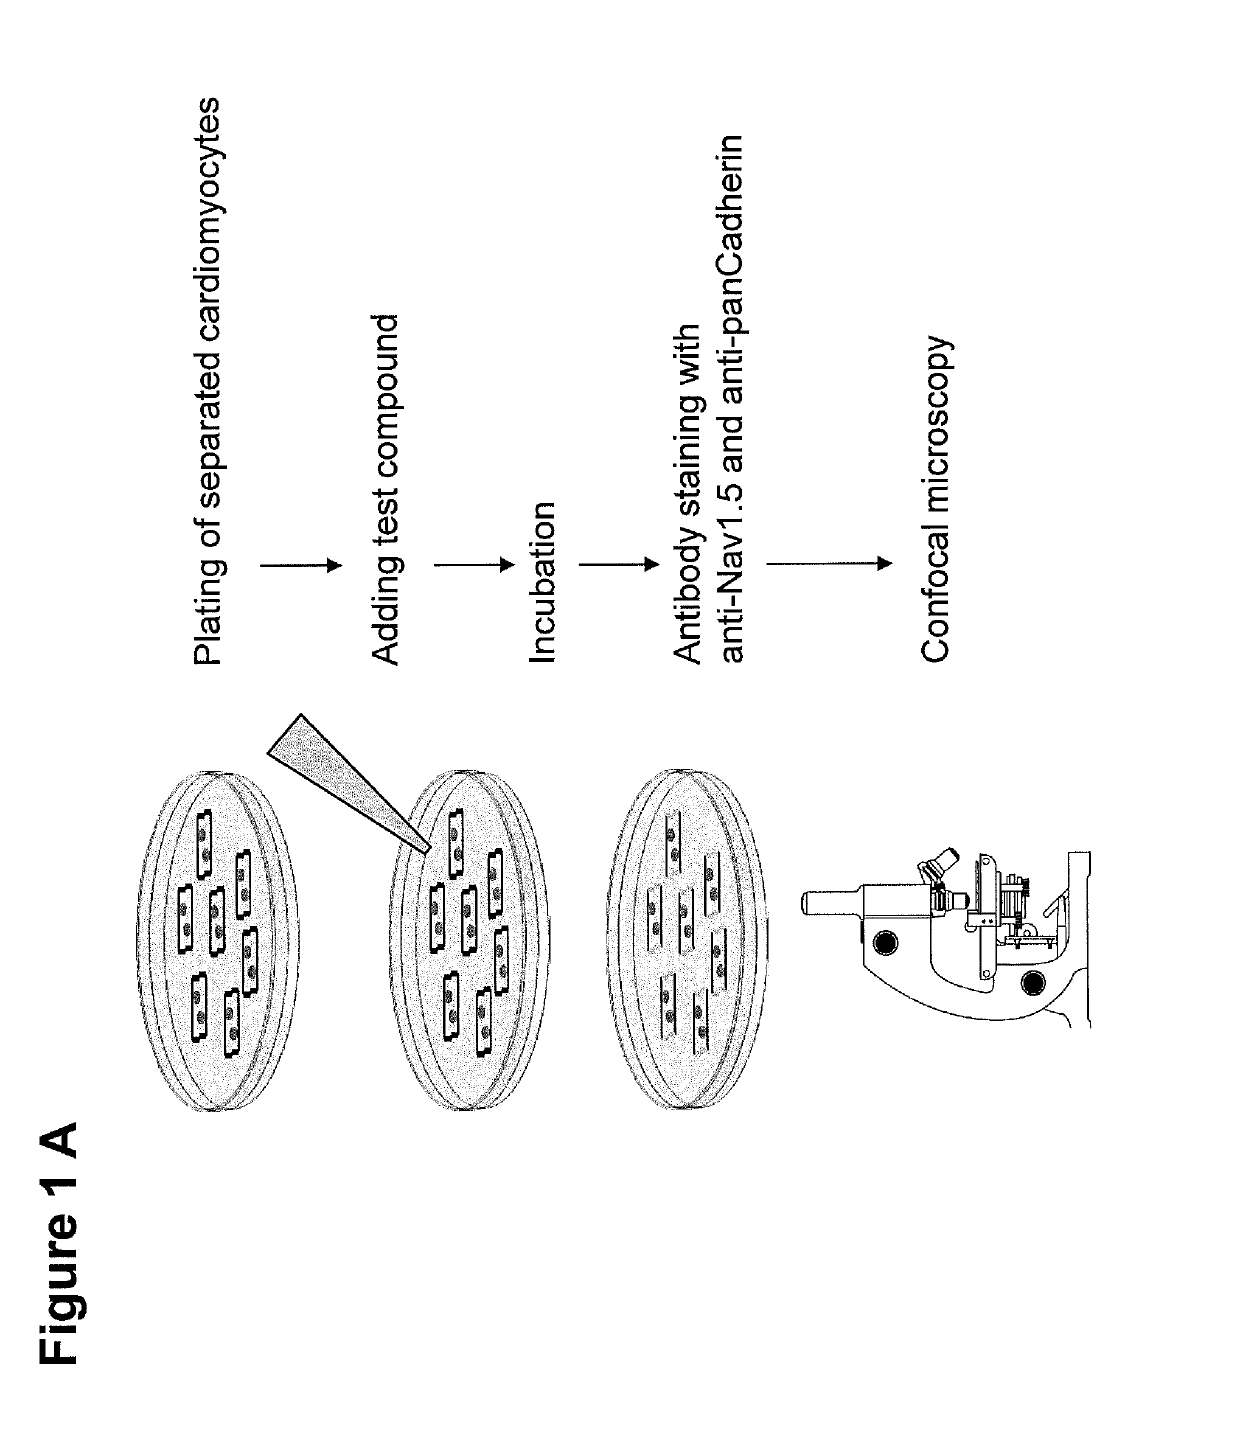 Method and kit for assessment of sodium channel-related anti- or pro-arrhythmic potential of compounds